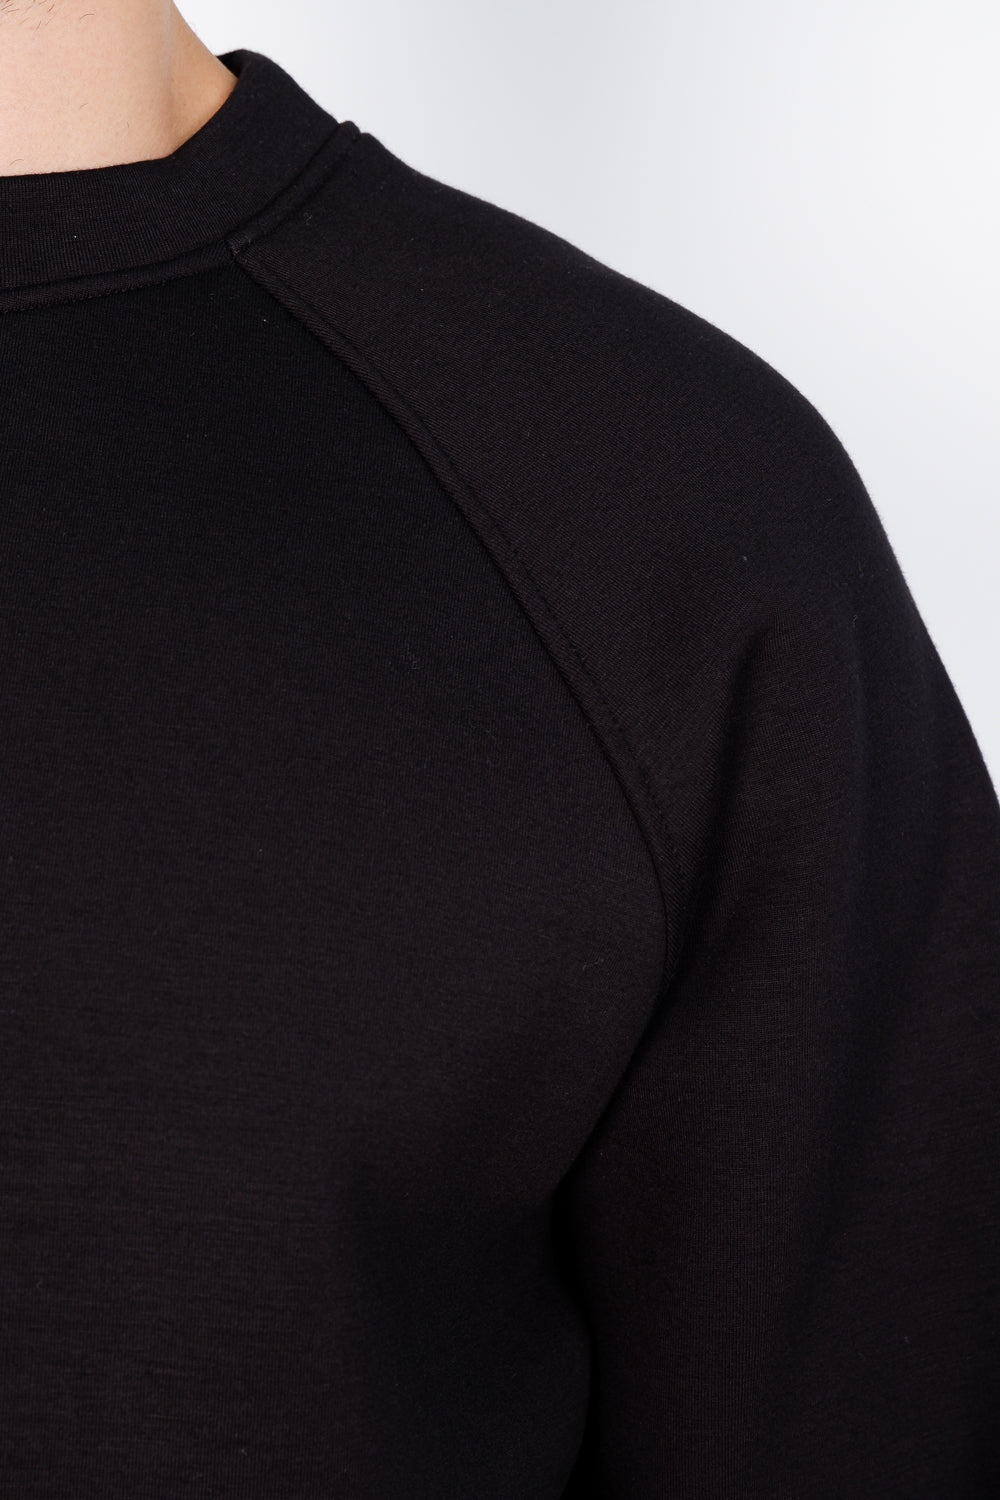 Buy the PT Torino Neoprene Sweatshirt Black at Intro. Spend £50 for free UK delivery. Official stockists. We ship worldwide.